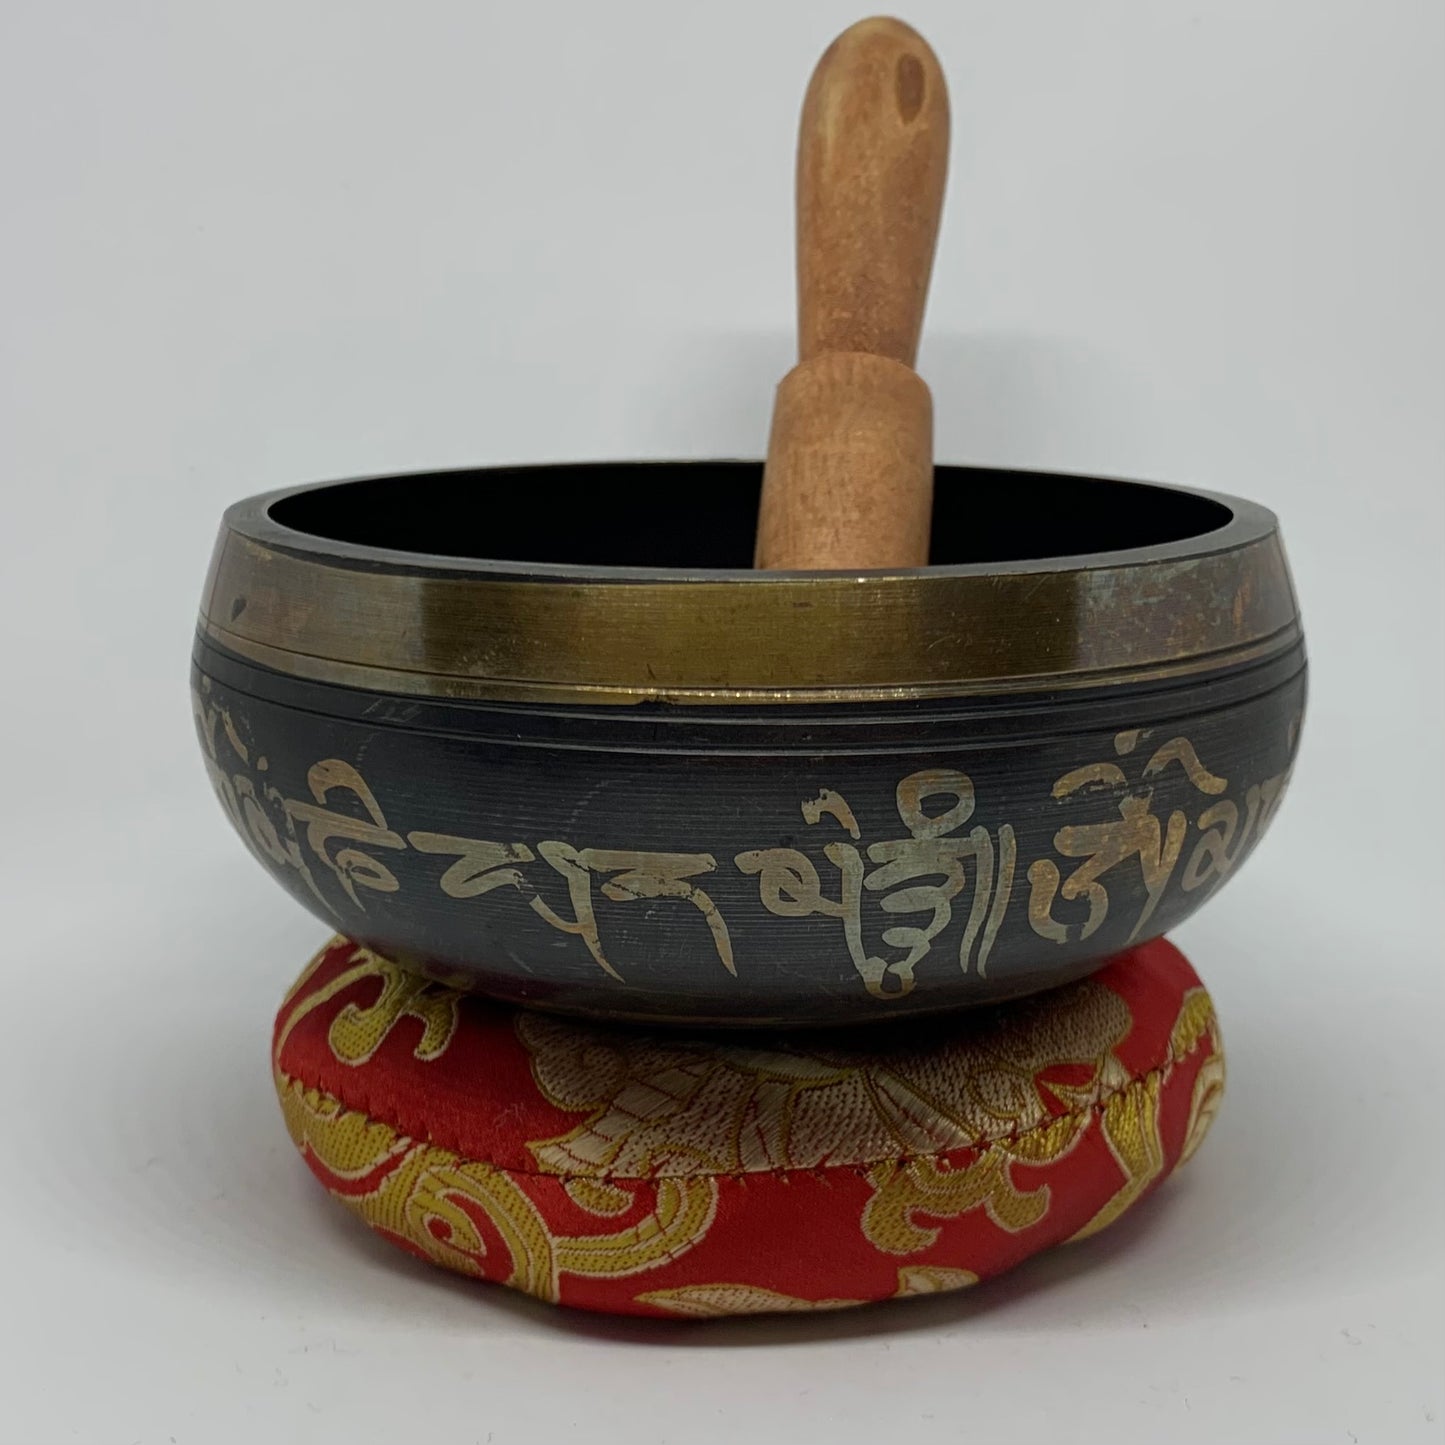 11.5cm Singing Bowl with striker and cushion